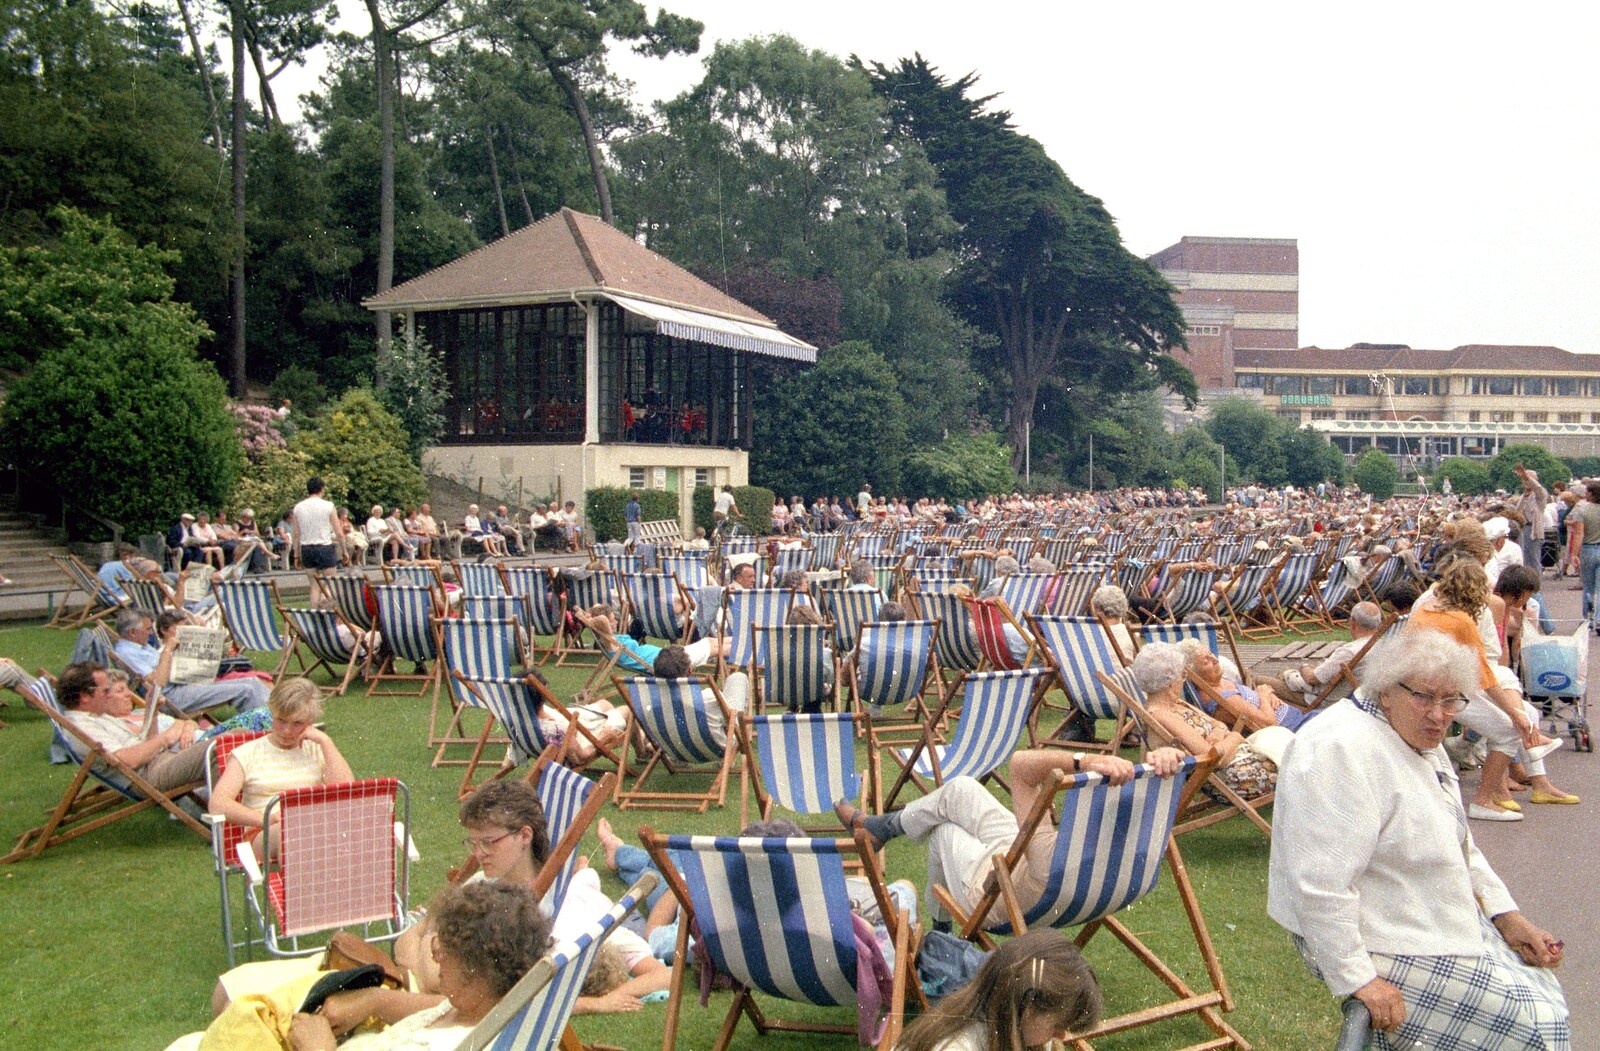 Massed deck chairs and a band in the pavillion from A CB Wedding and a Derelict Railway, Hampshire - 20th July 1986